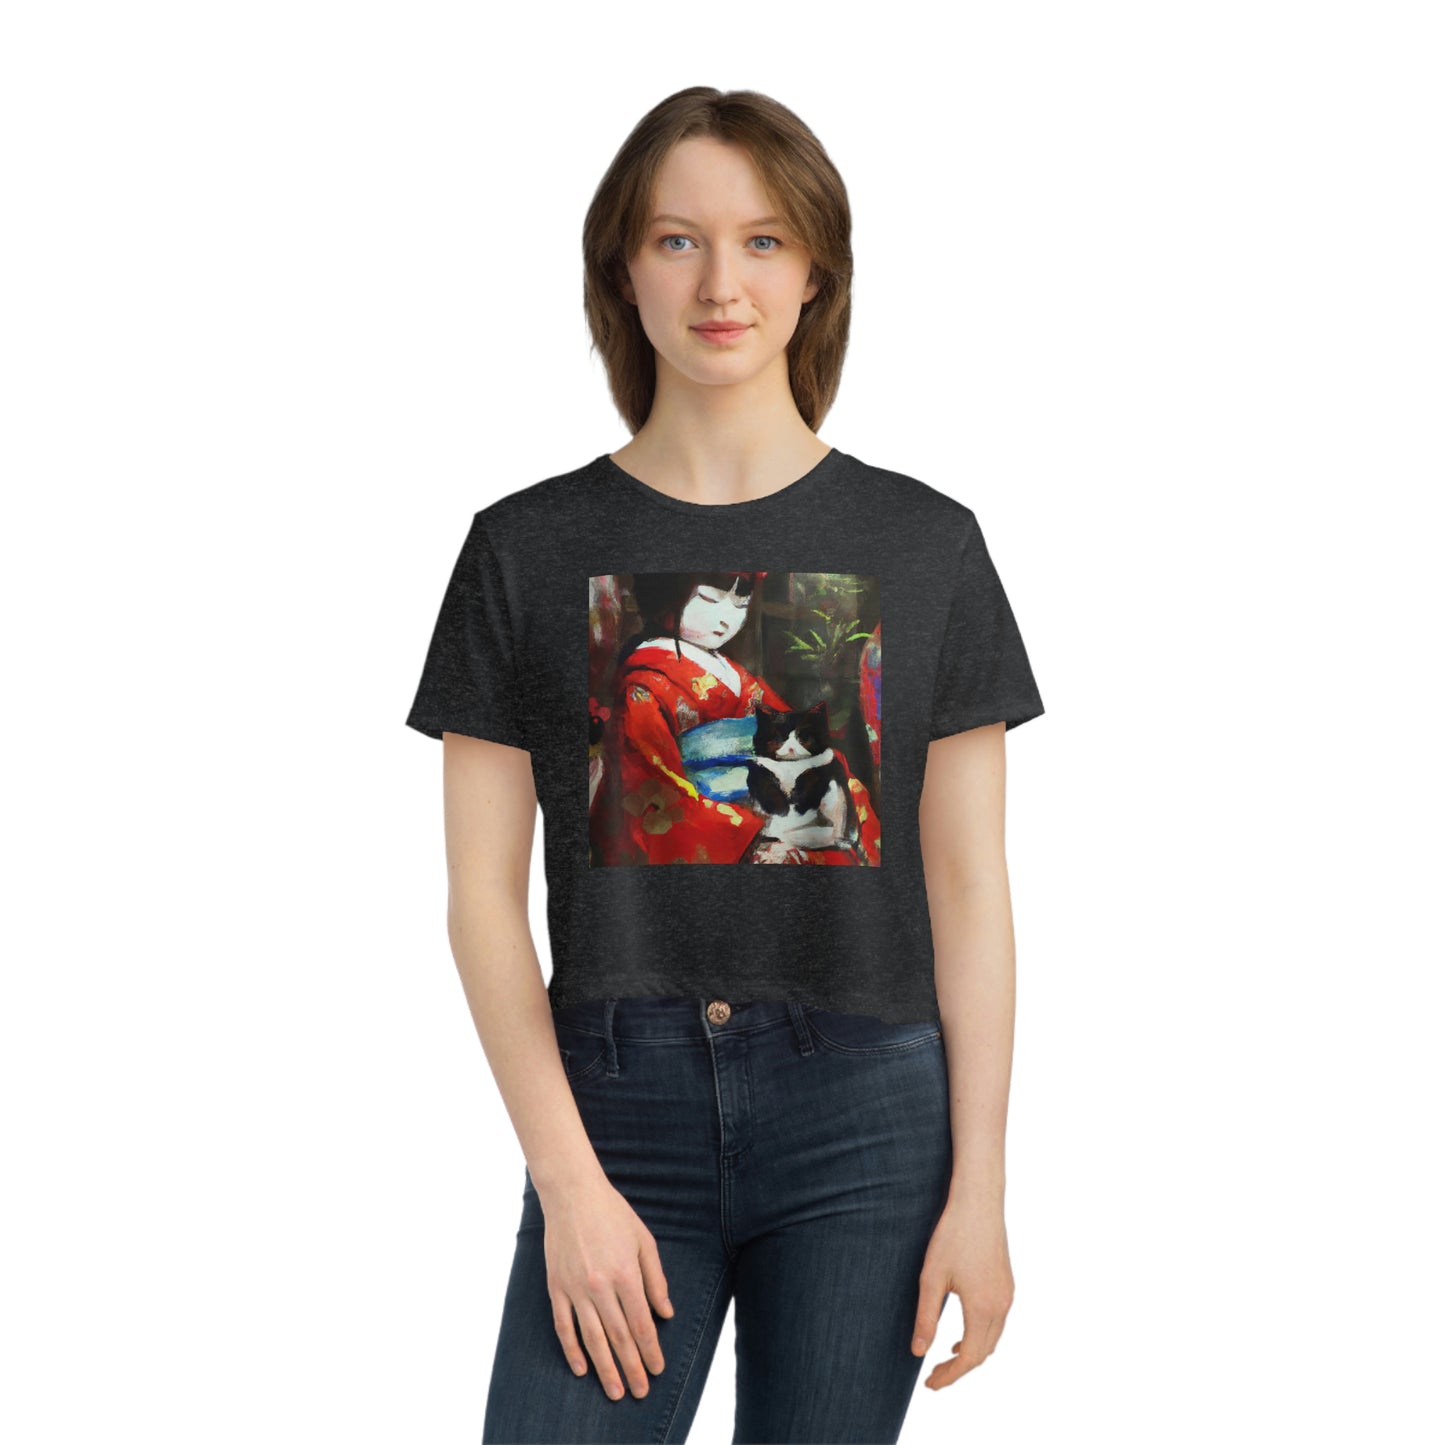 Geisha and cat Women's Flowy Cropped Tee